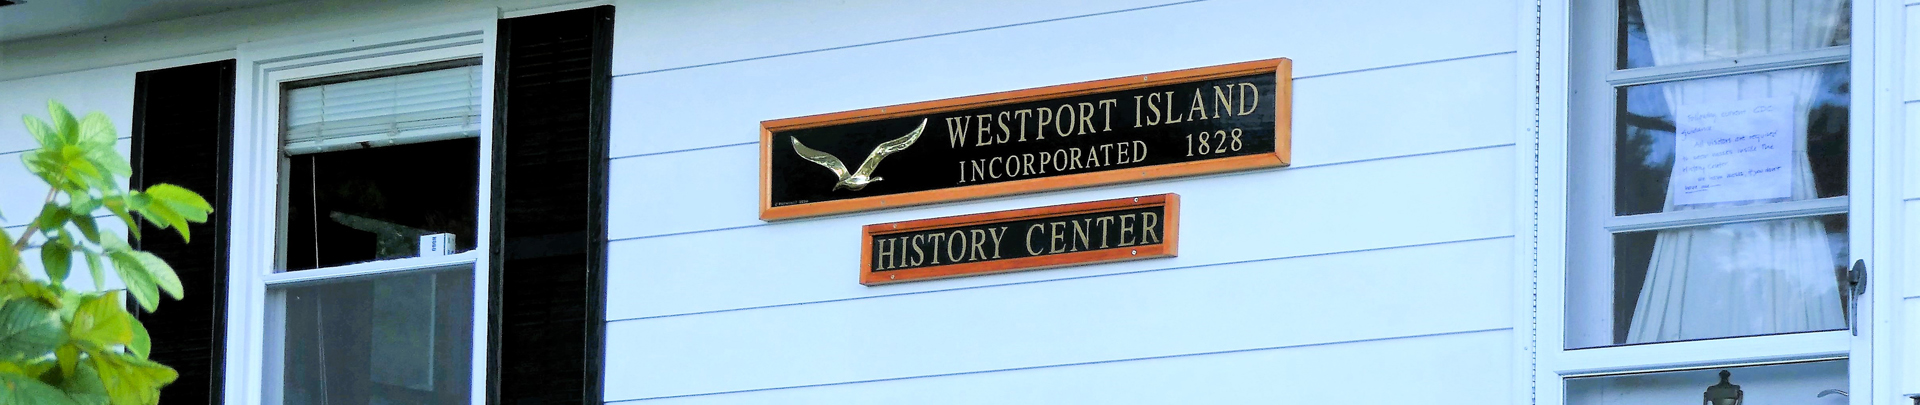 History Center Sign